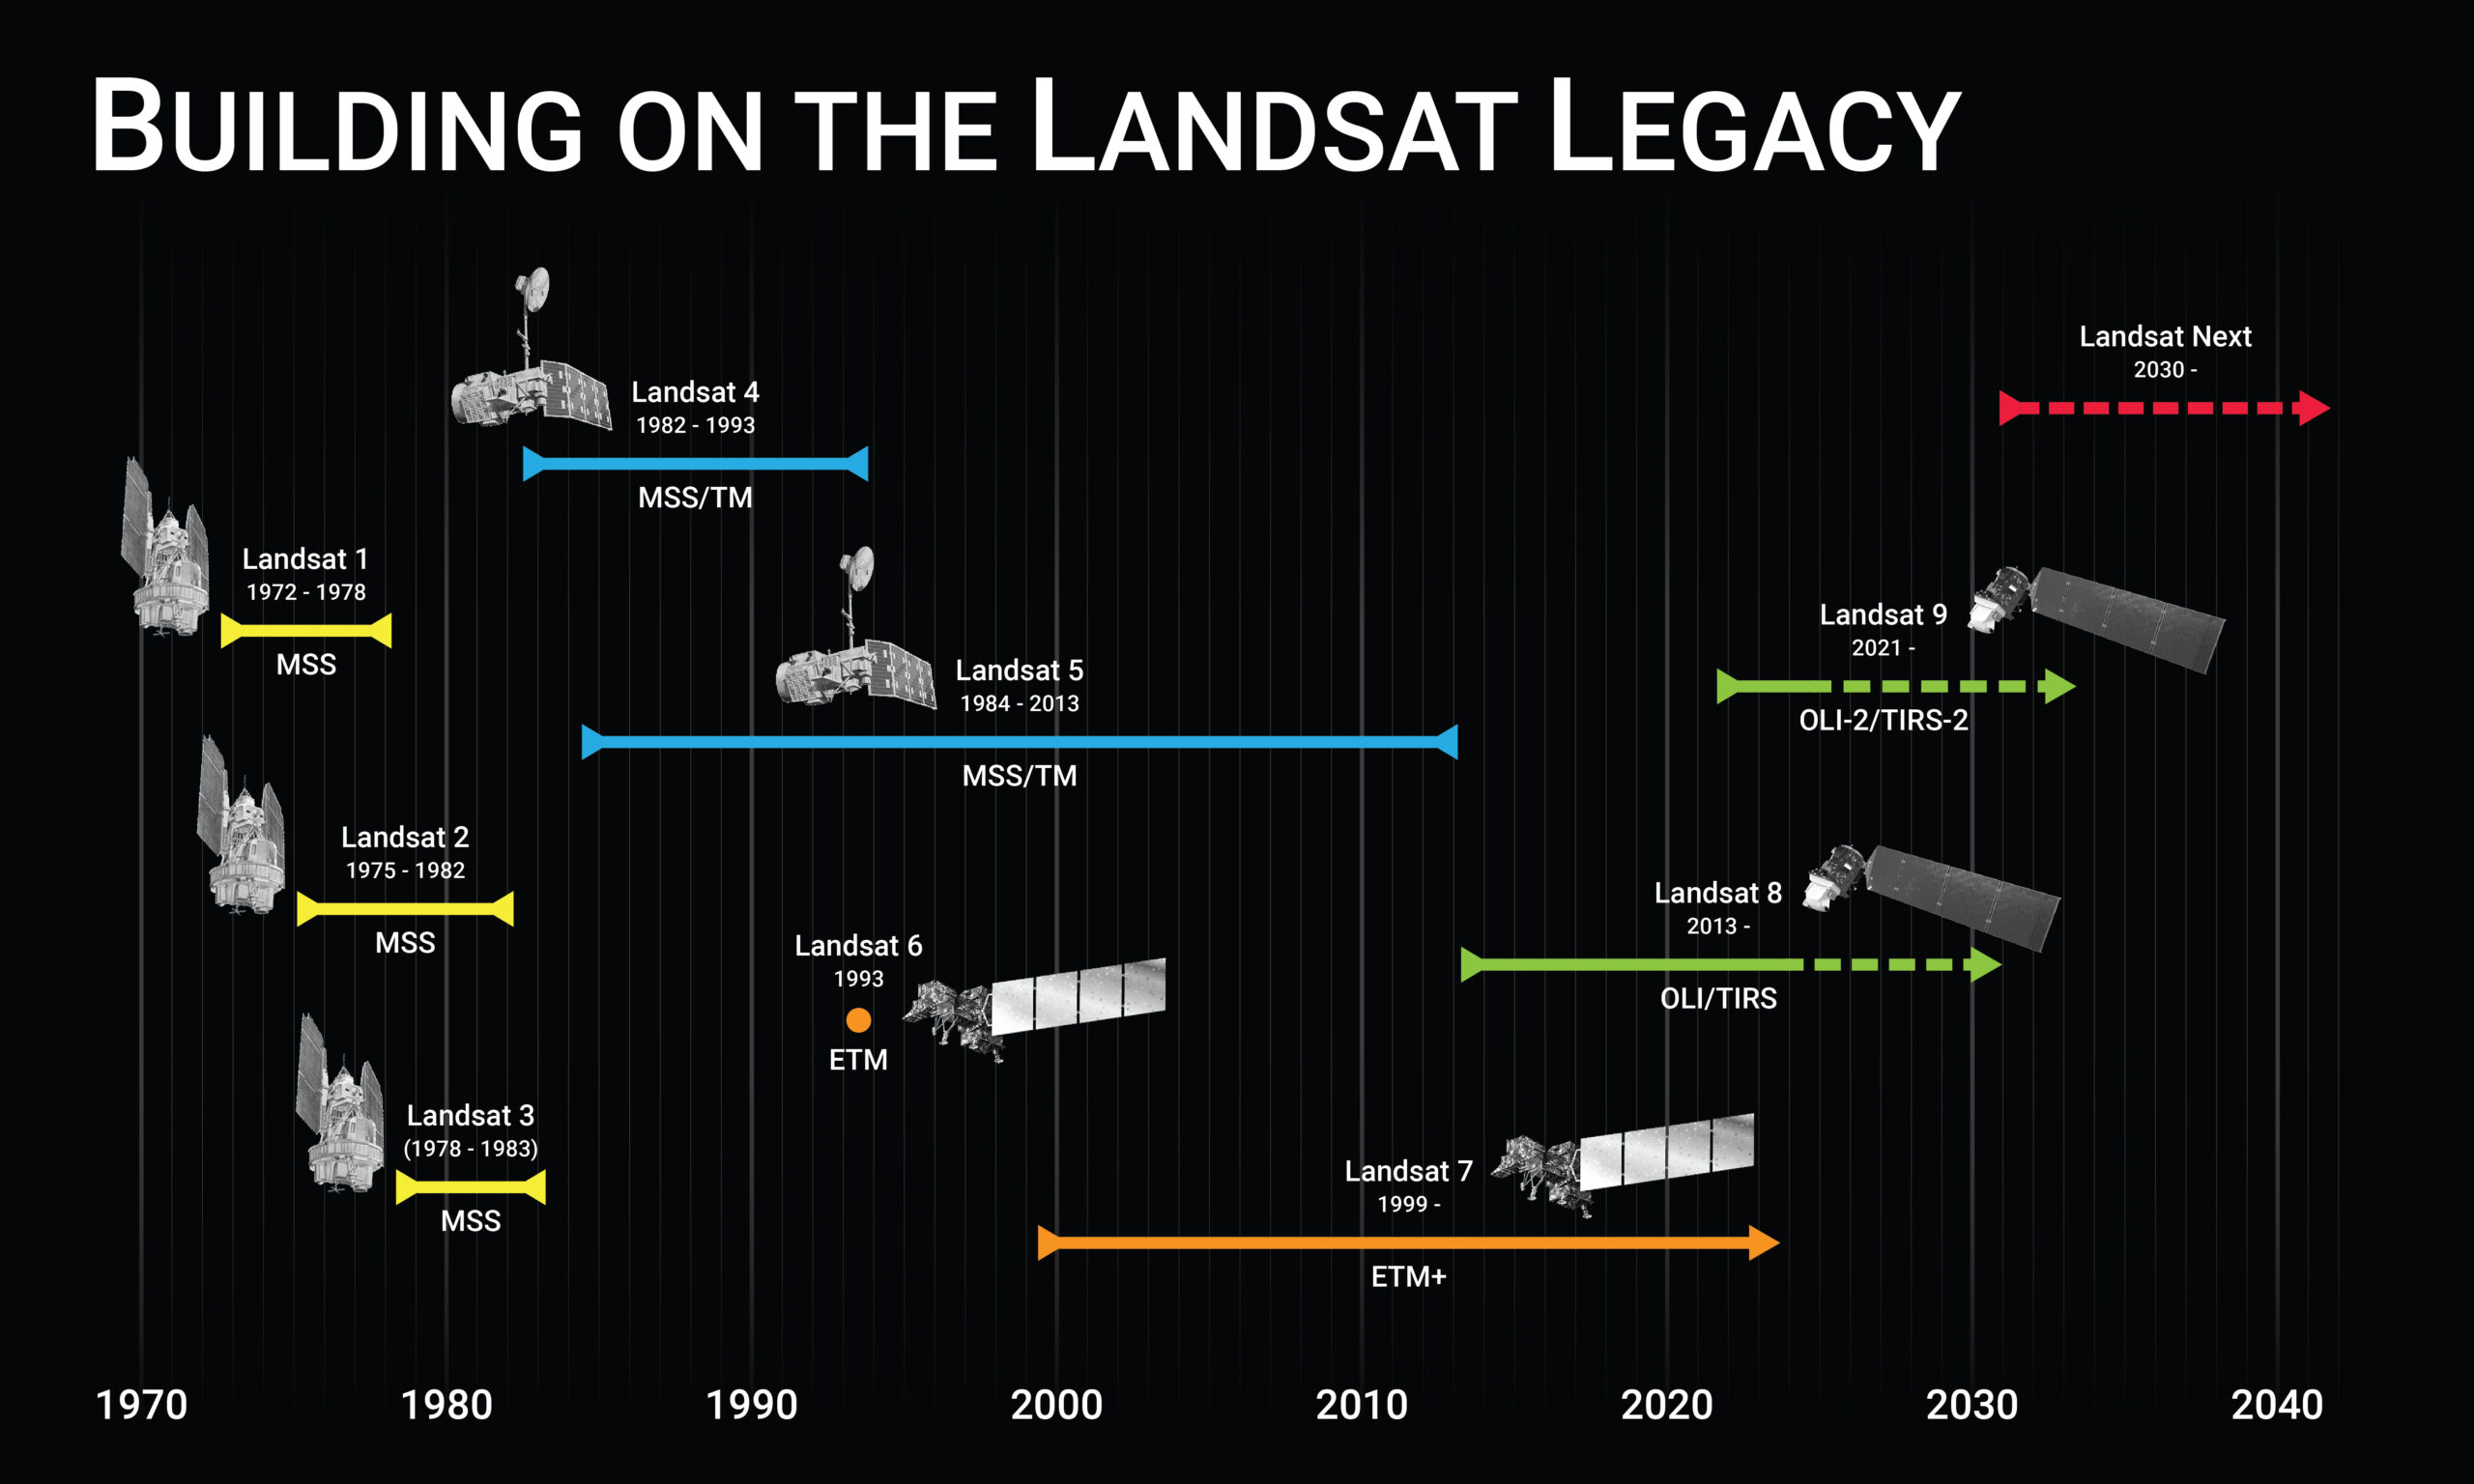 Landsat Program timeline showing all missions from 1972 to the expected launch date of Landsat Next in late 2030.